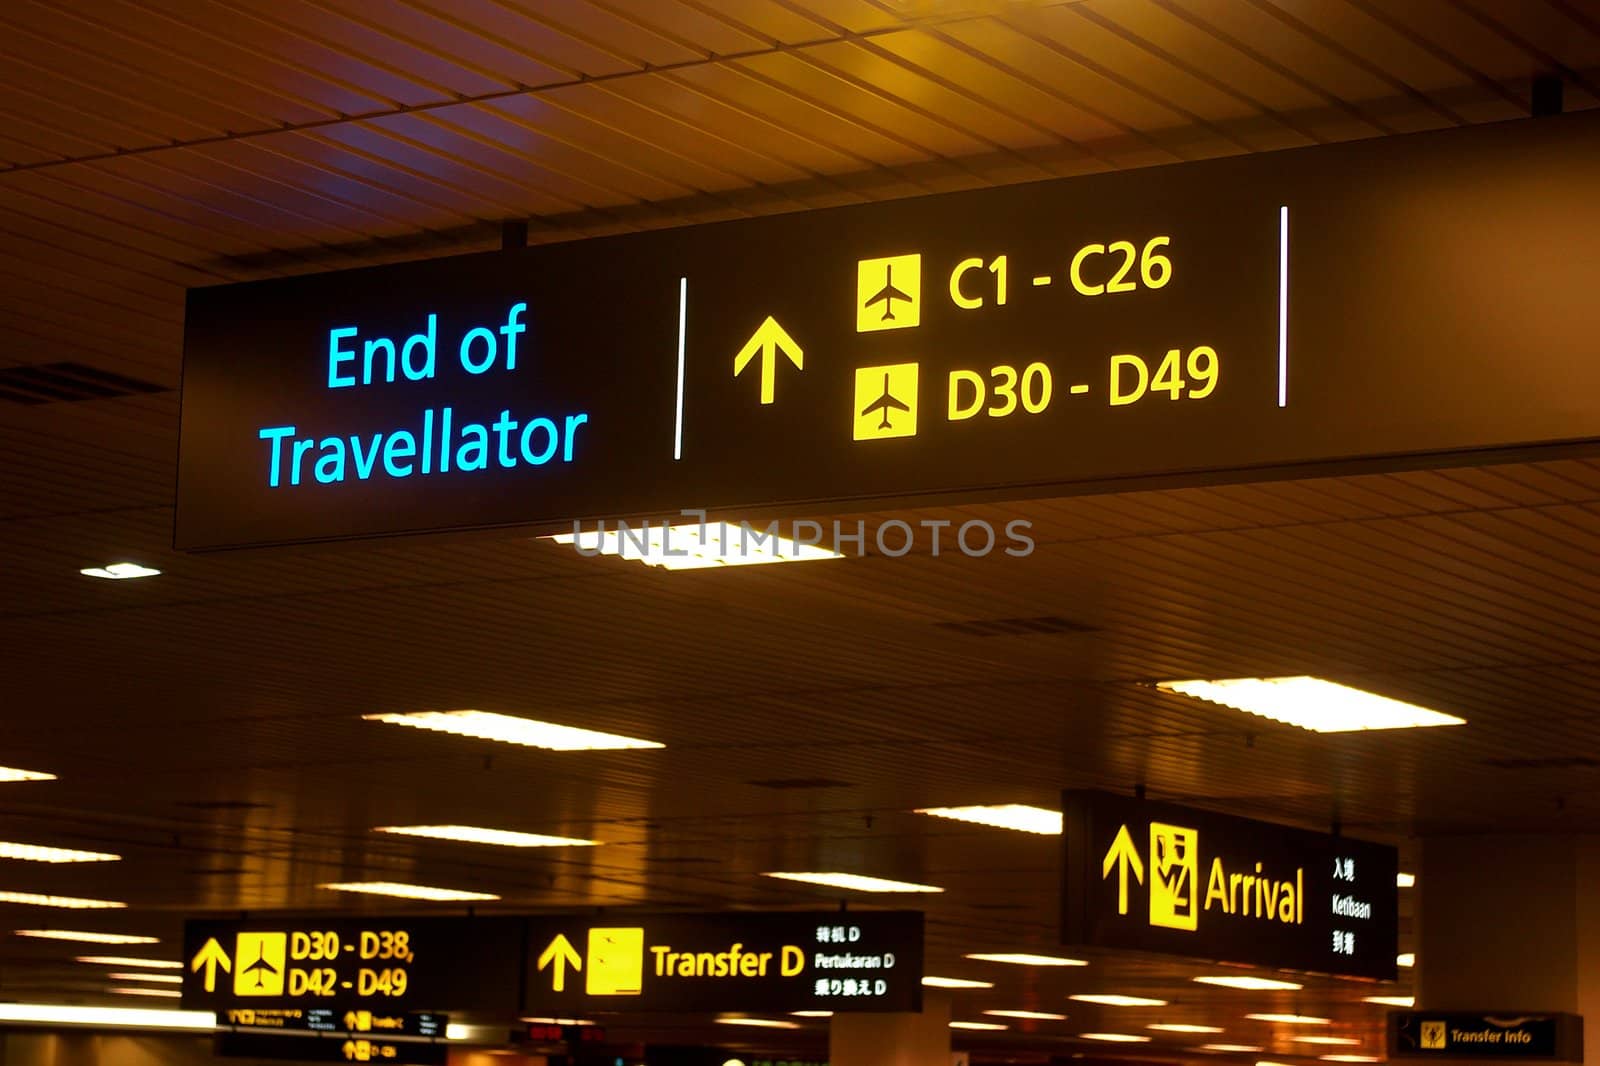 Signs in airport terminal by Komar